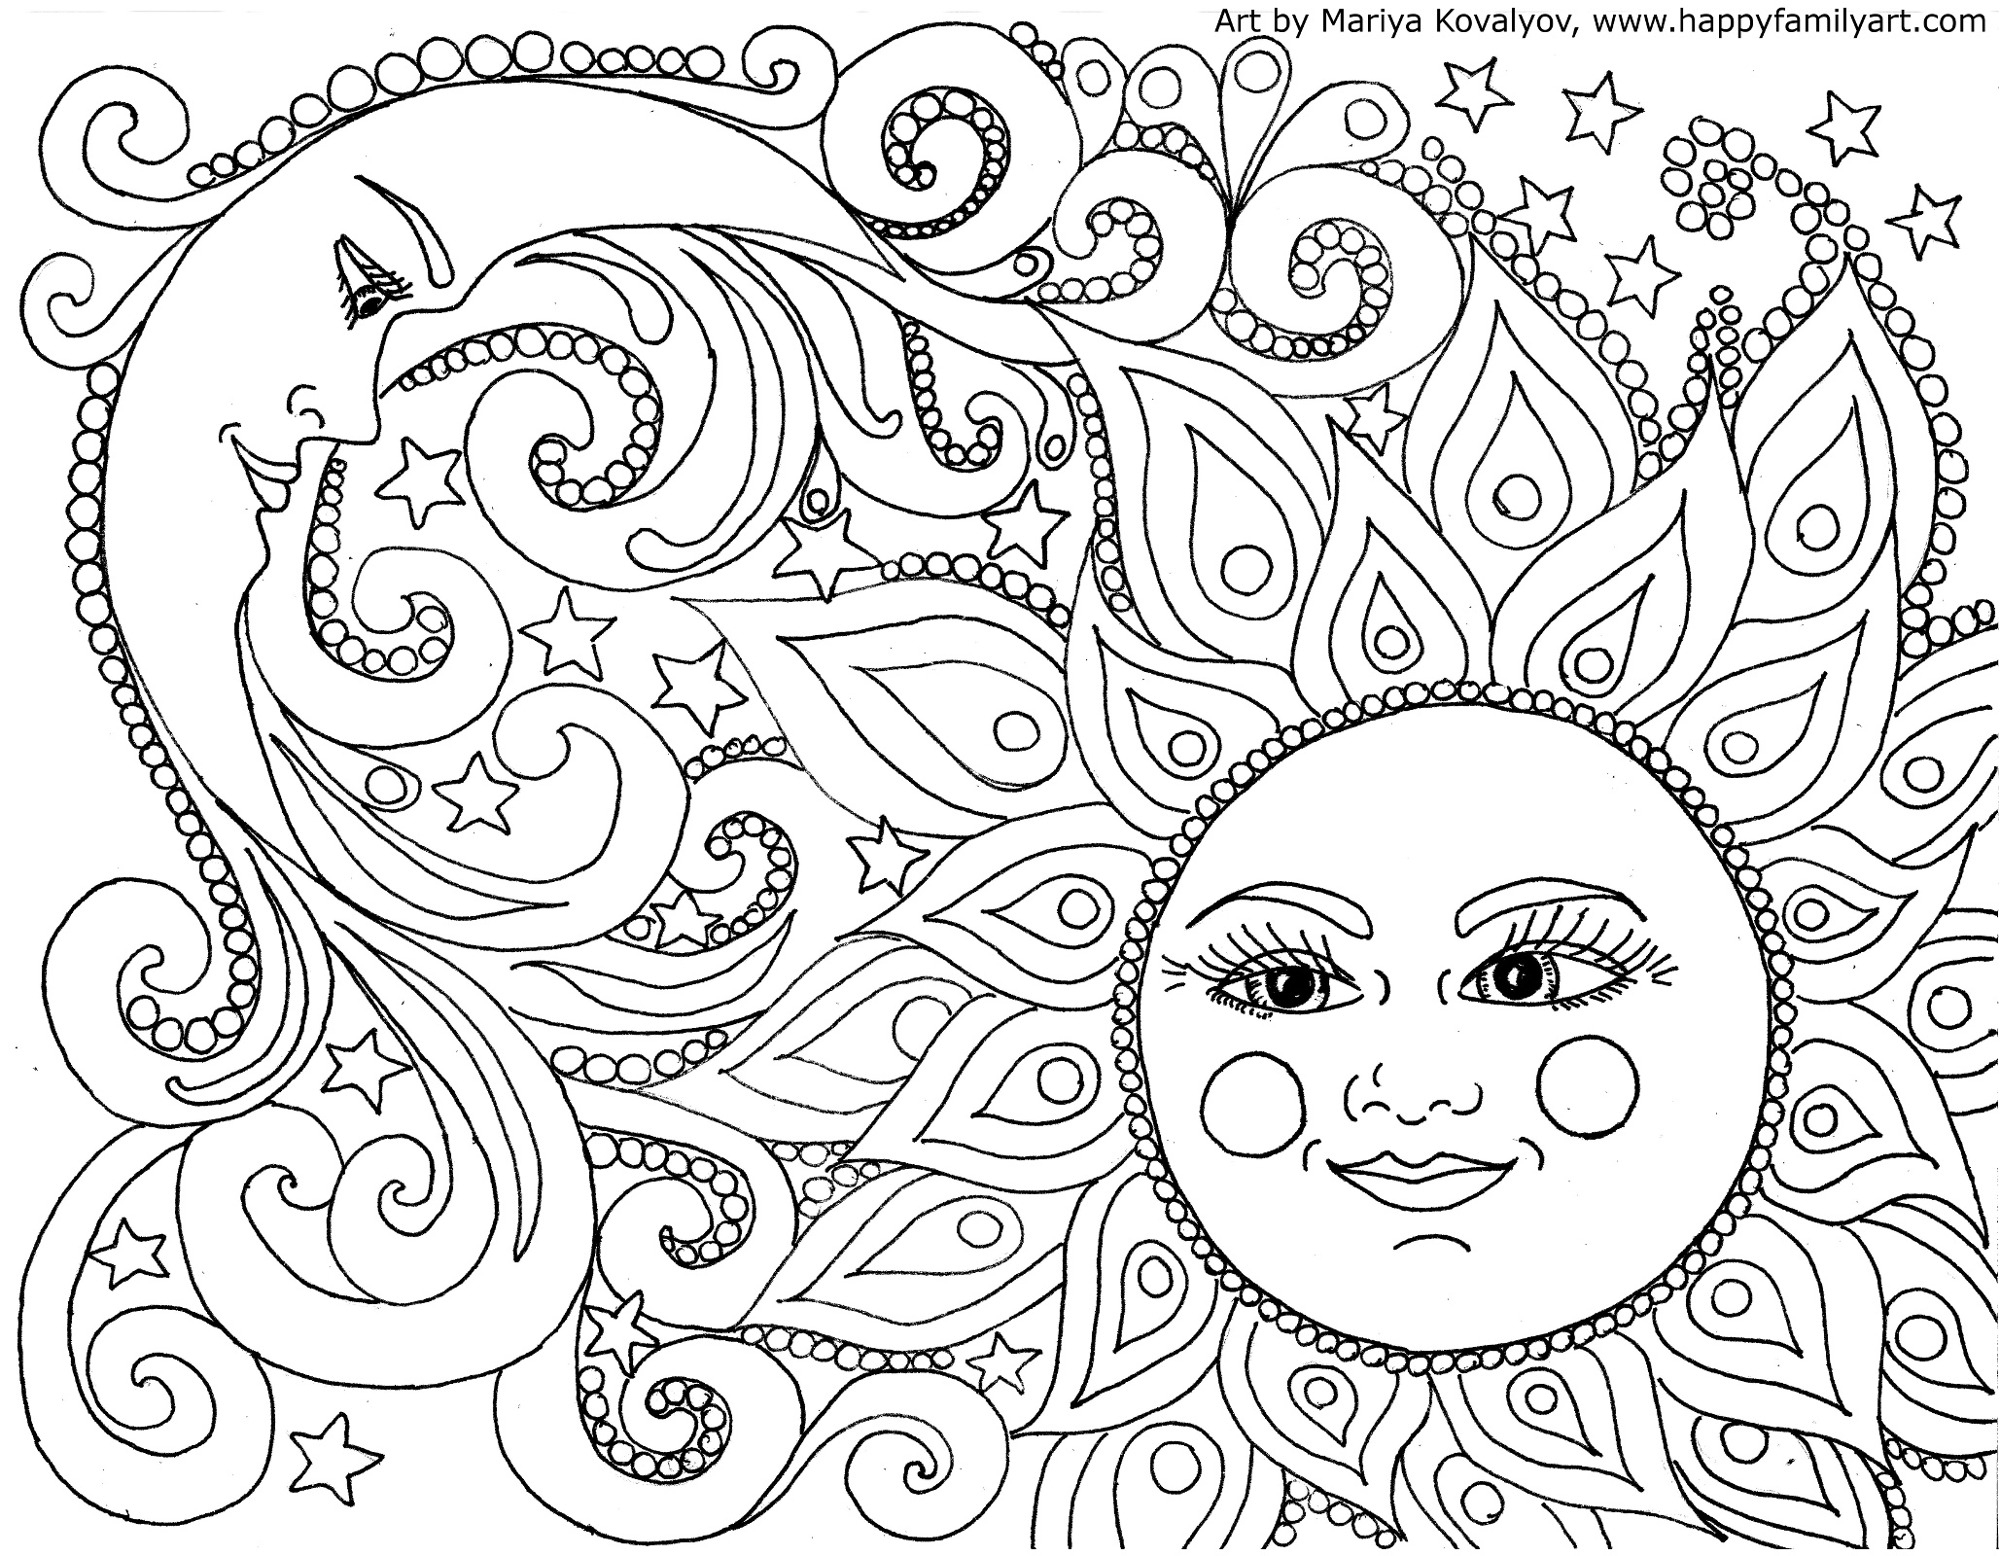 Happy Family Art - Original And Fun Coloring Pages - Free Printable Coloring Pages For Adults Pdf